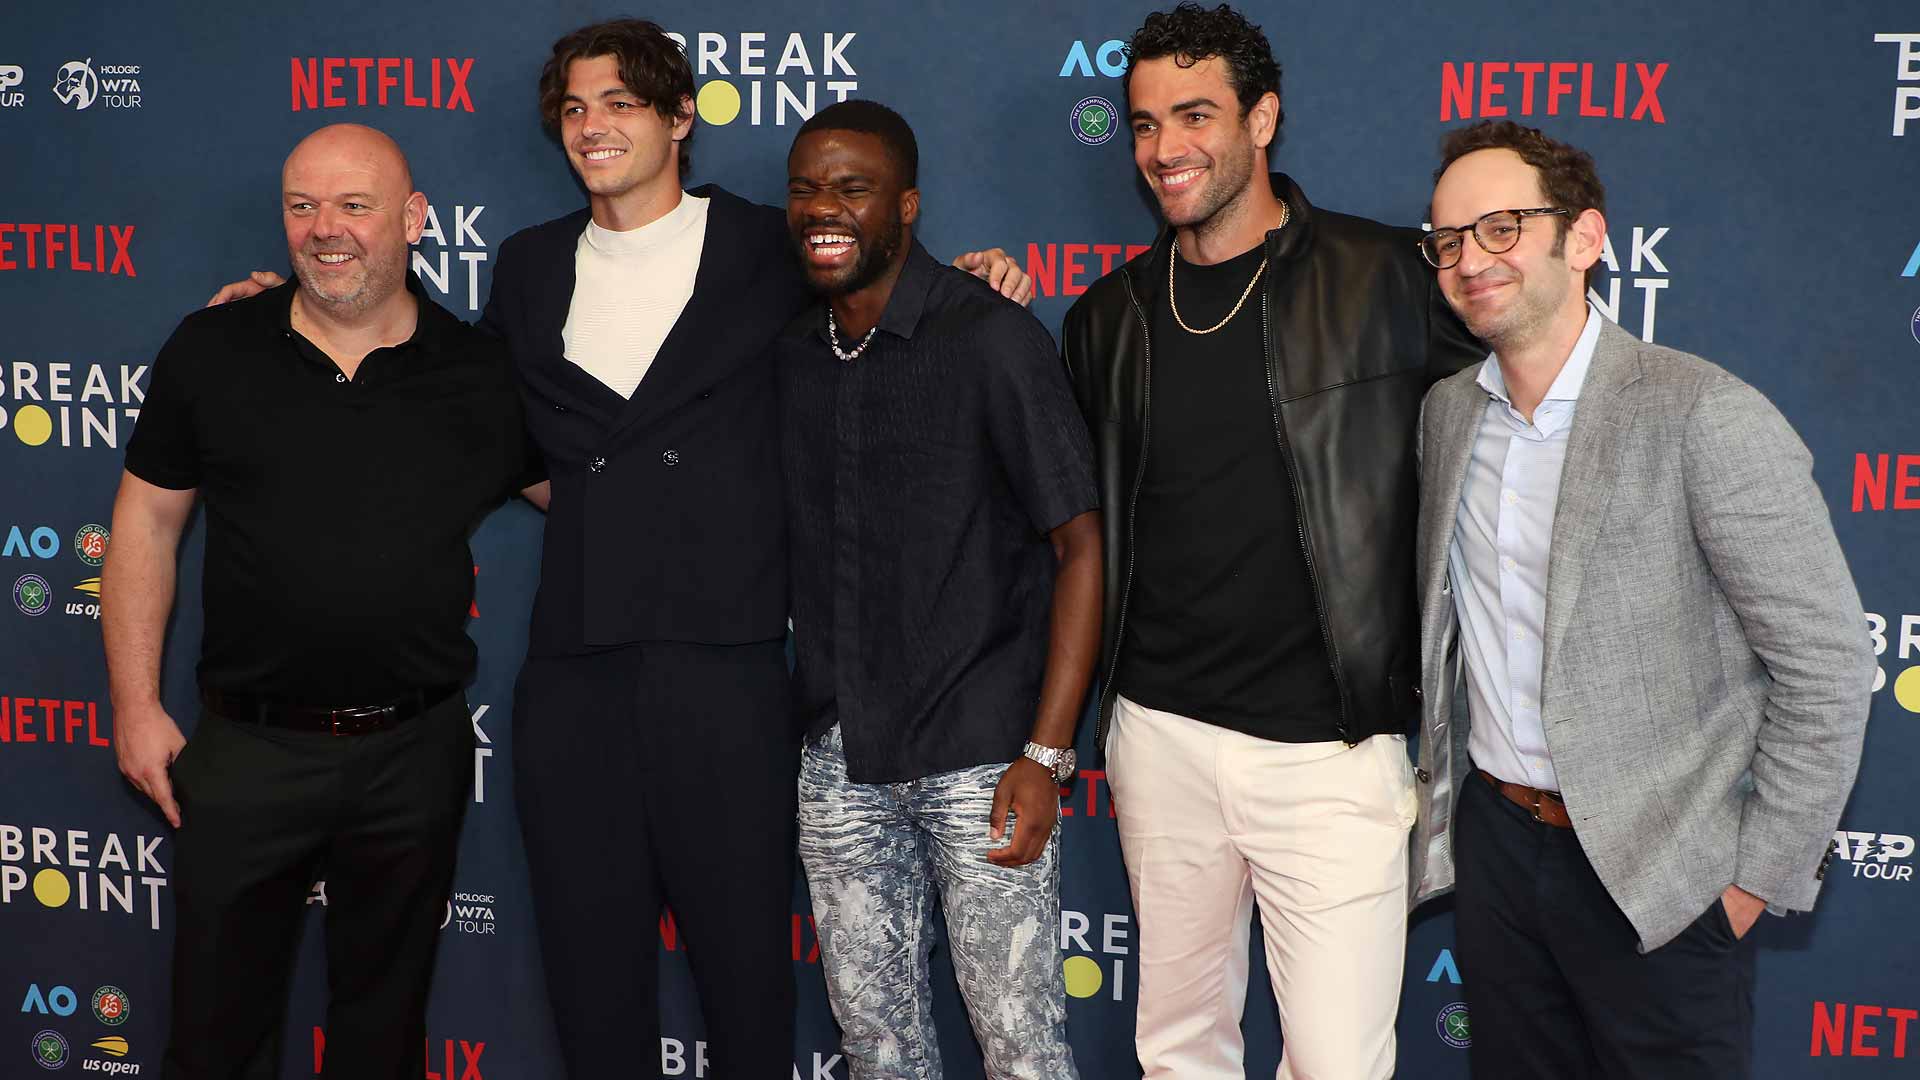 Executive Producer Paul Martin, Taylor Fritz, Frances Tiafoe, Matteo Berrettini and Netflix Director of Documentary Series Gabe Spitzer at the premiere of Break Point.